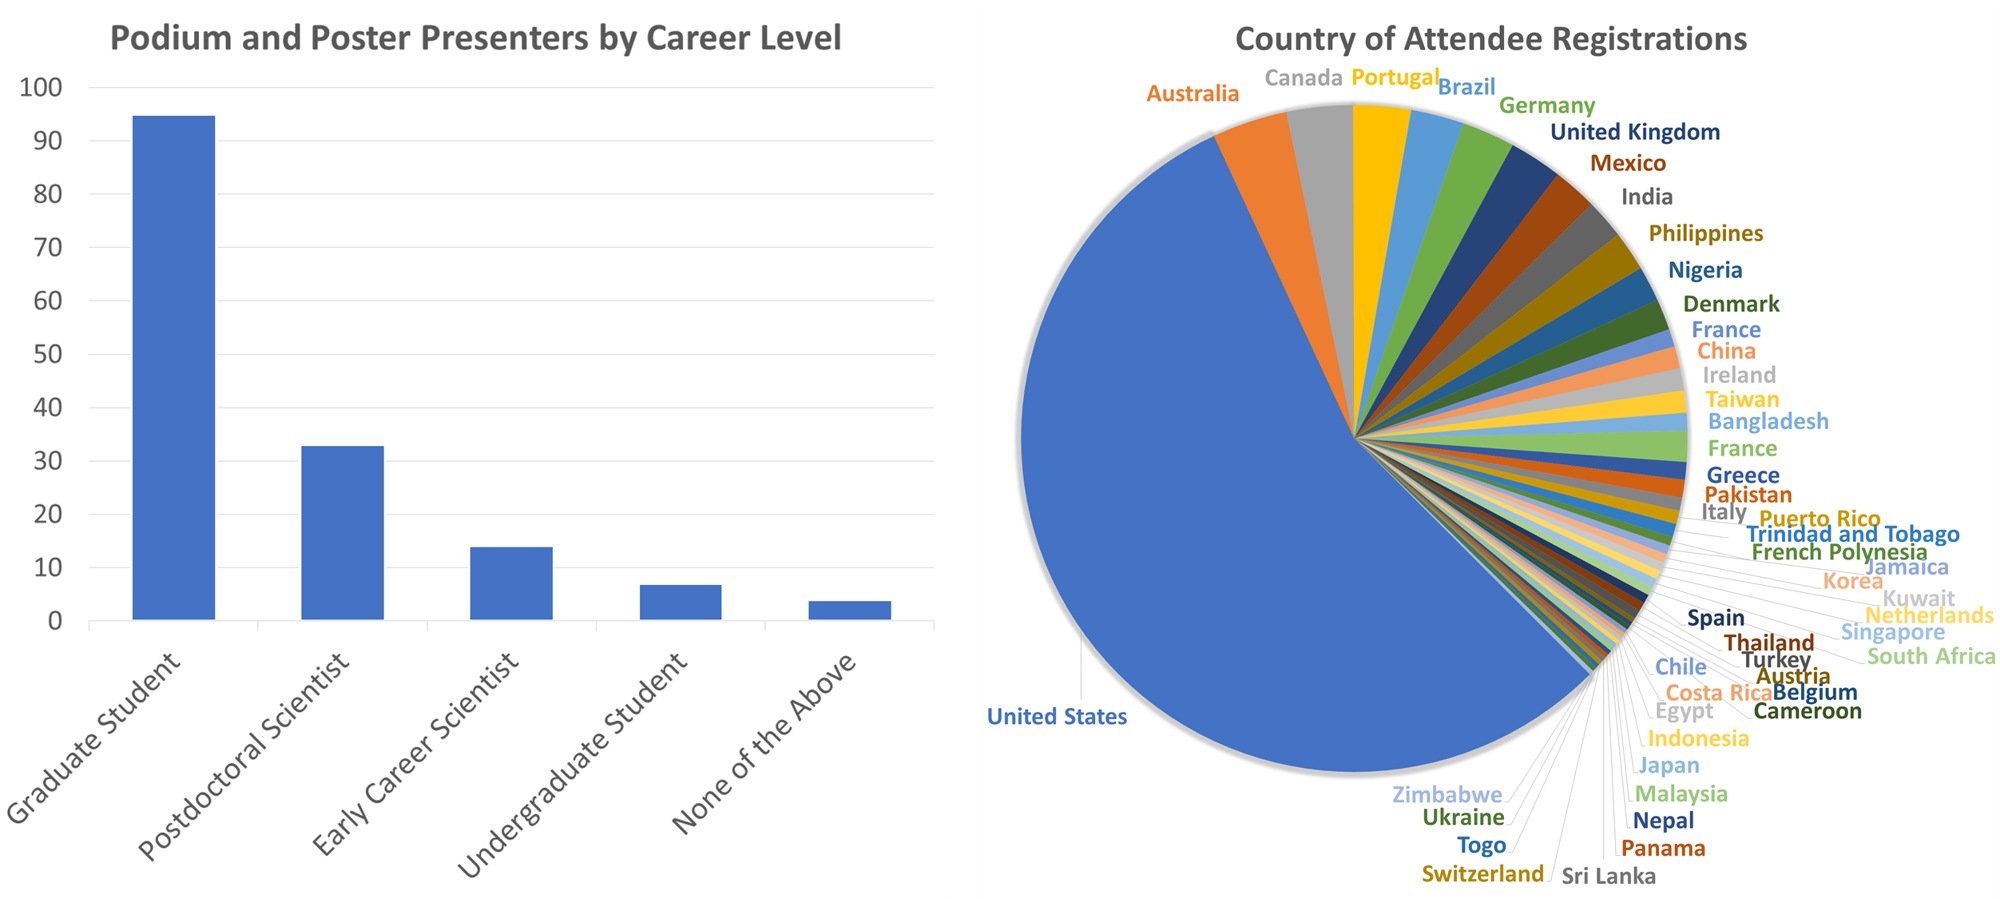 Demographics of the conference. Bar chart shows career level of the podium and poster presenters. Pie chart shows the country of all attendees’ registrations. All data were self-reported by participants.